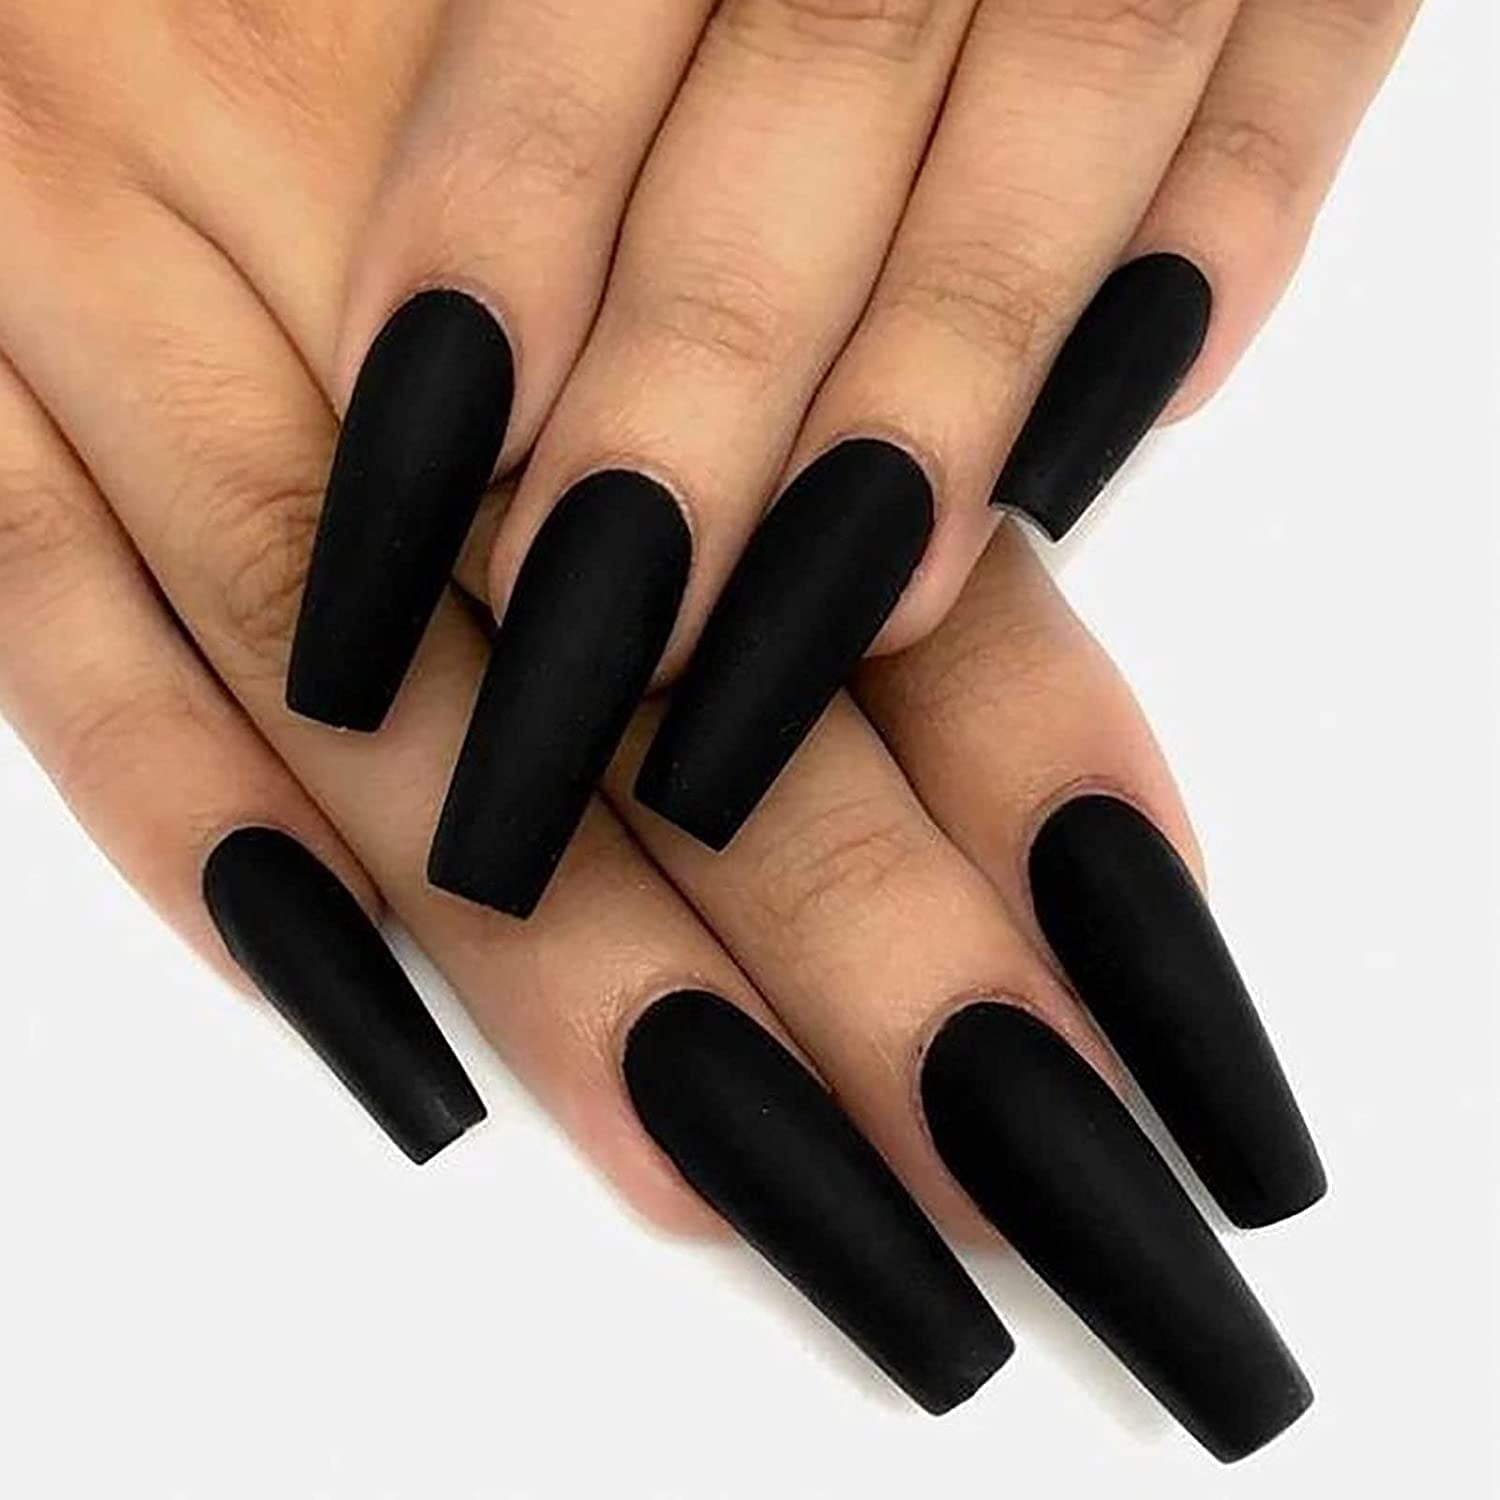 How to dry matte nail polish faster - Quora